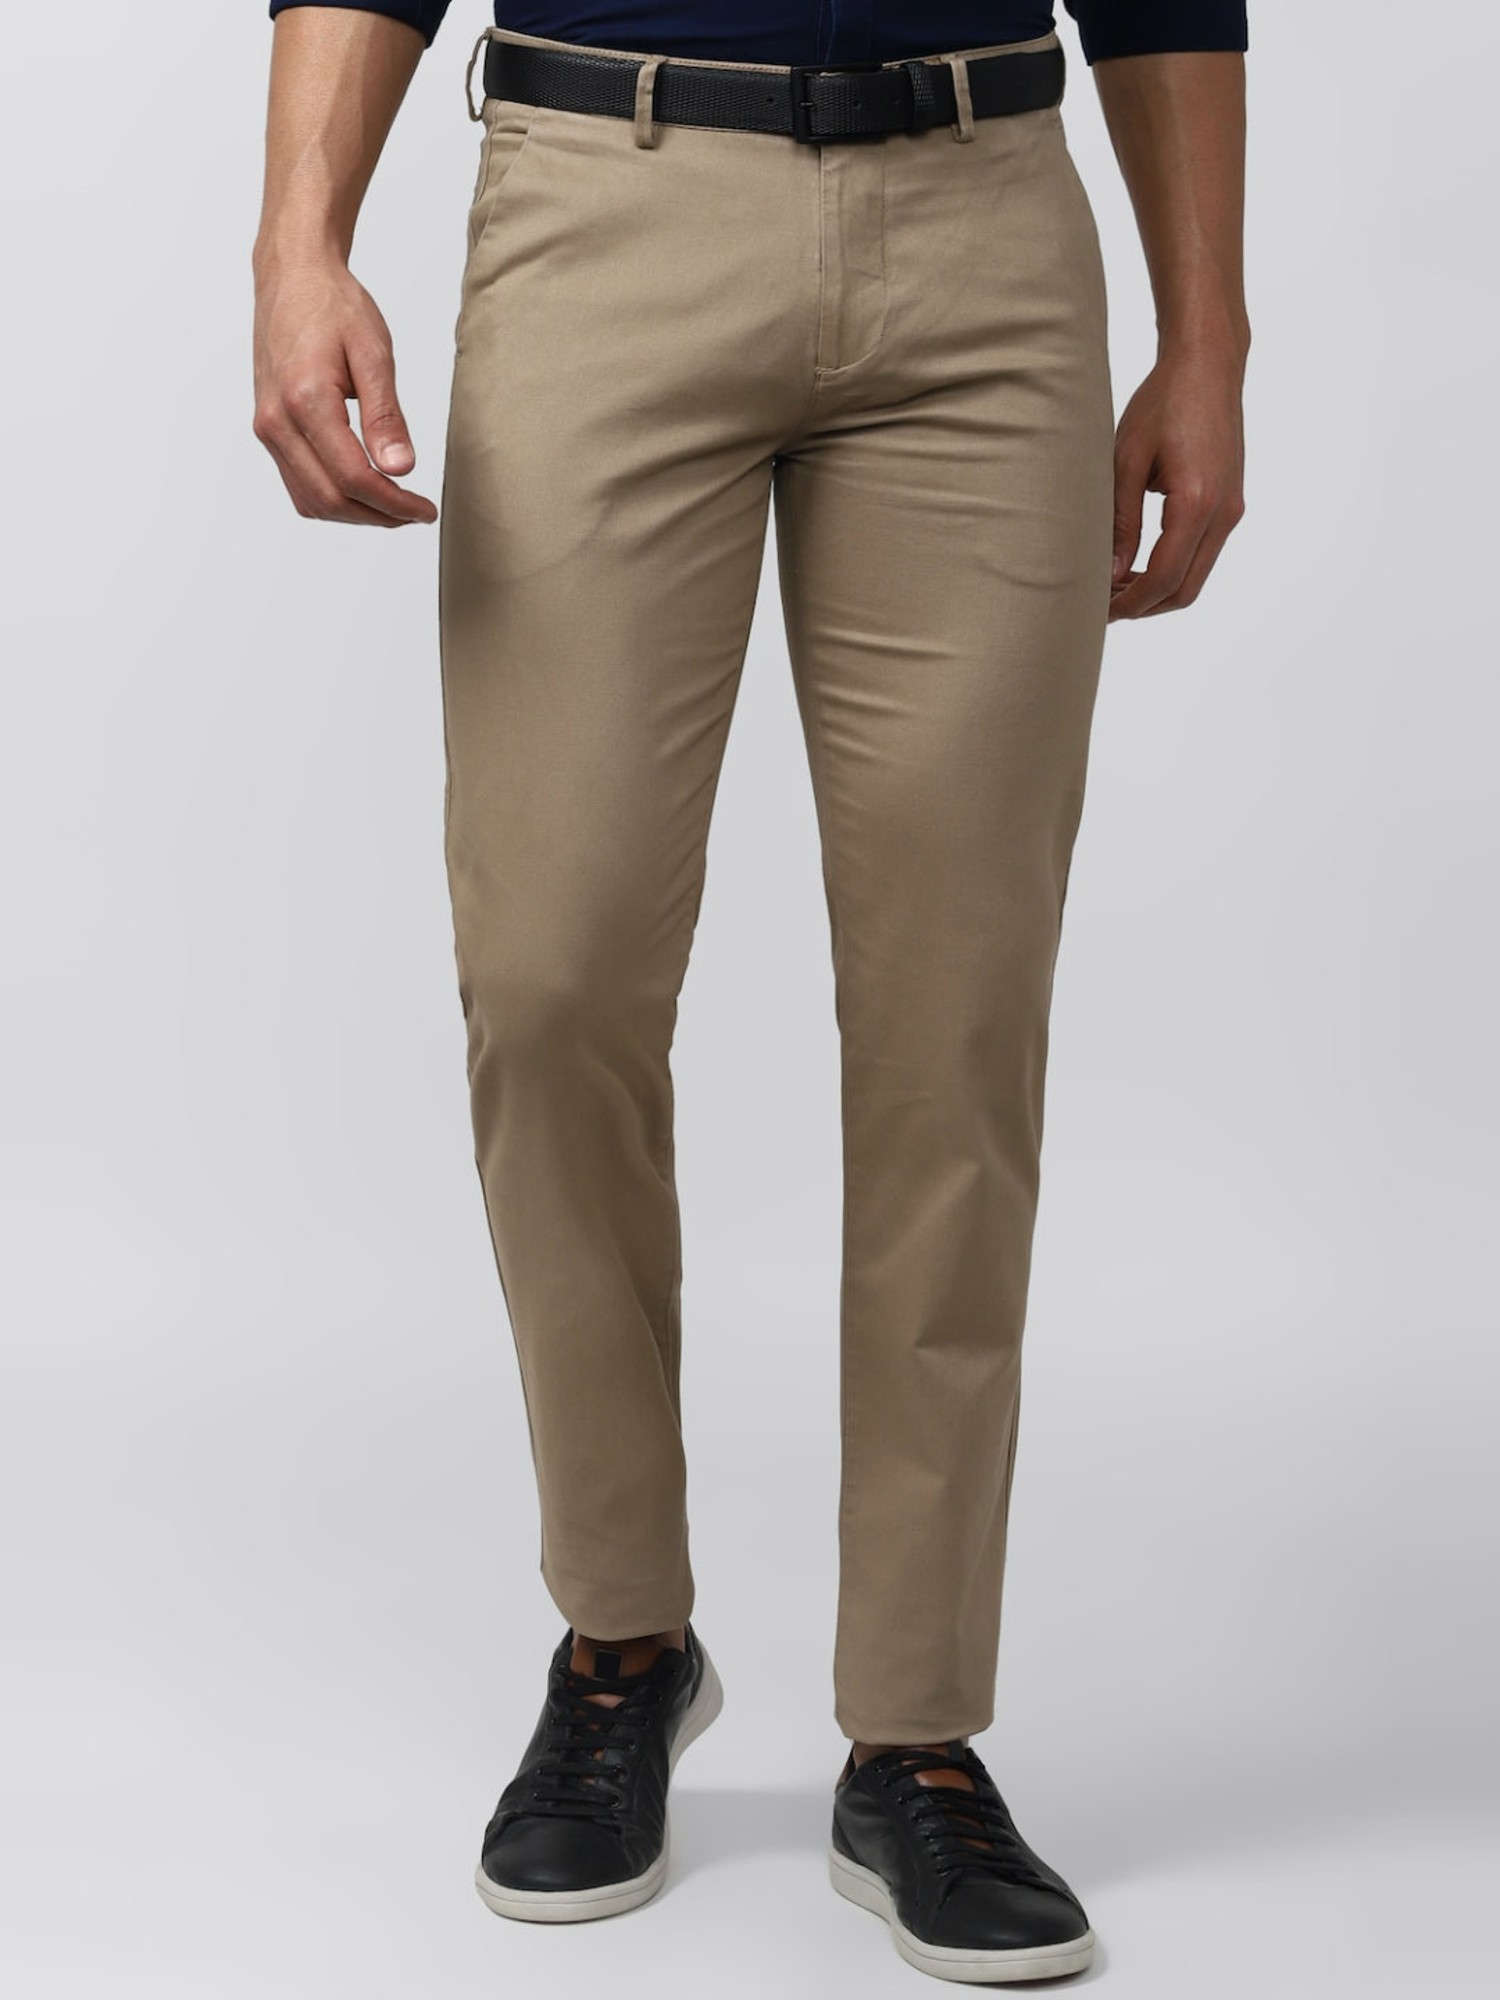 PETER ENGLAND Skinny Fit Men Green Trousers - Buy PETER ENGLAND Skinny Fit  Men Green Trousers Online at Best Prices in India | Flipkart.com